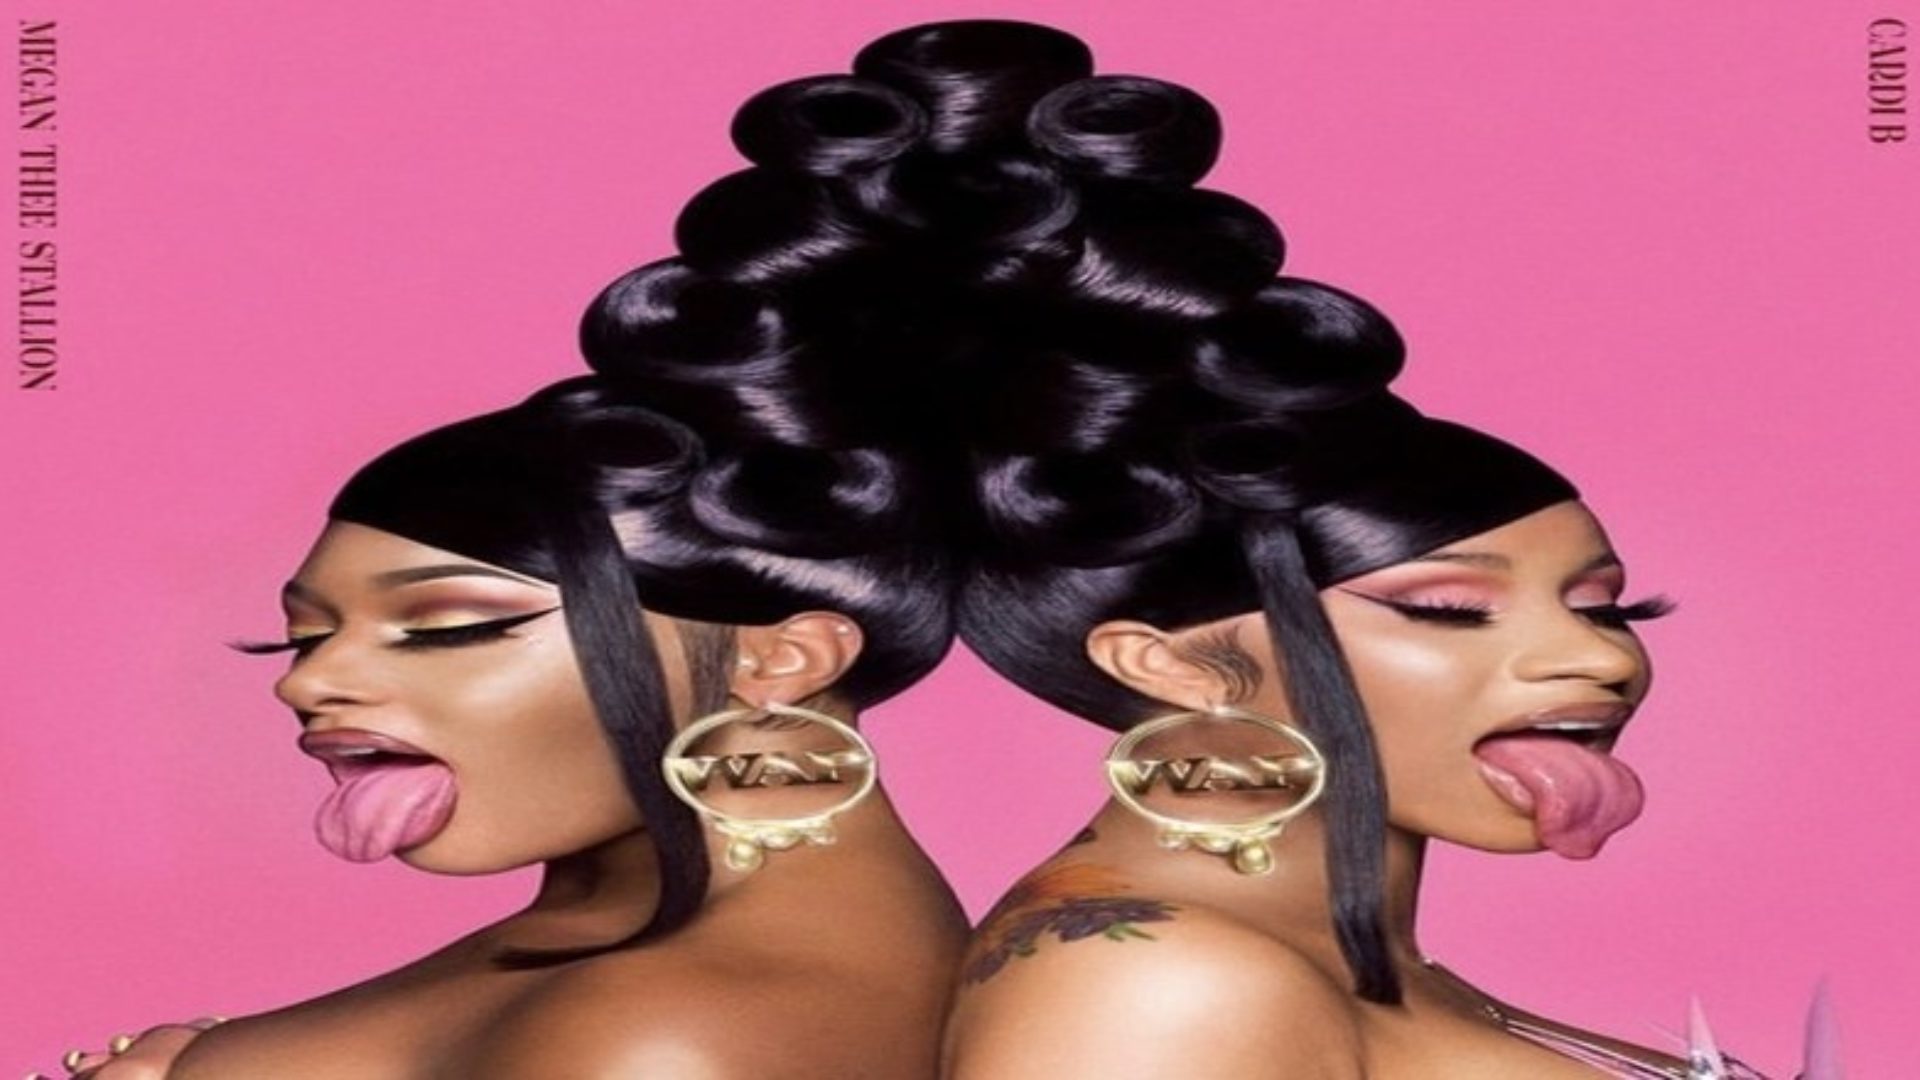 Cardi B and Megan Thee Stallion's '90s Updo Hairstyle Trend